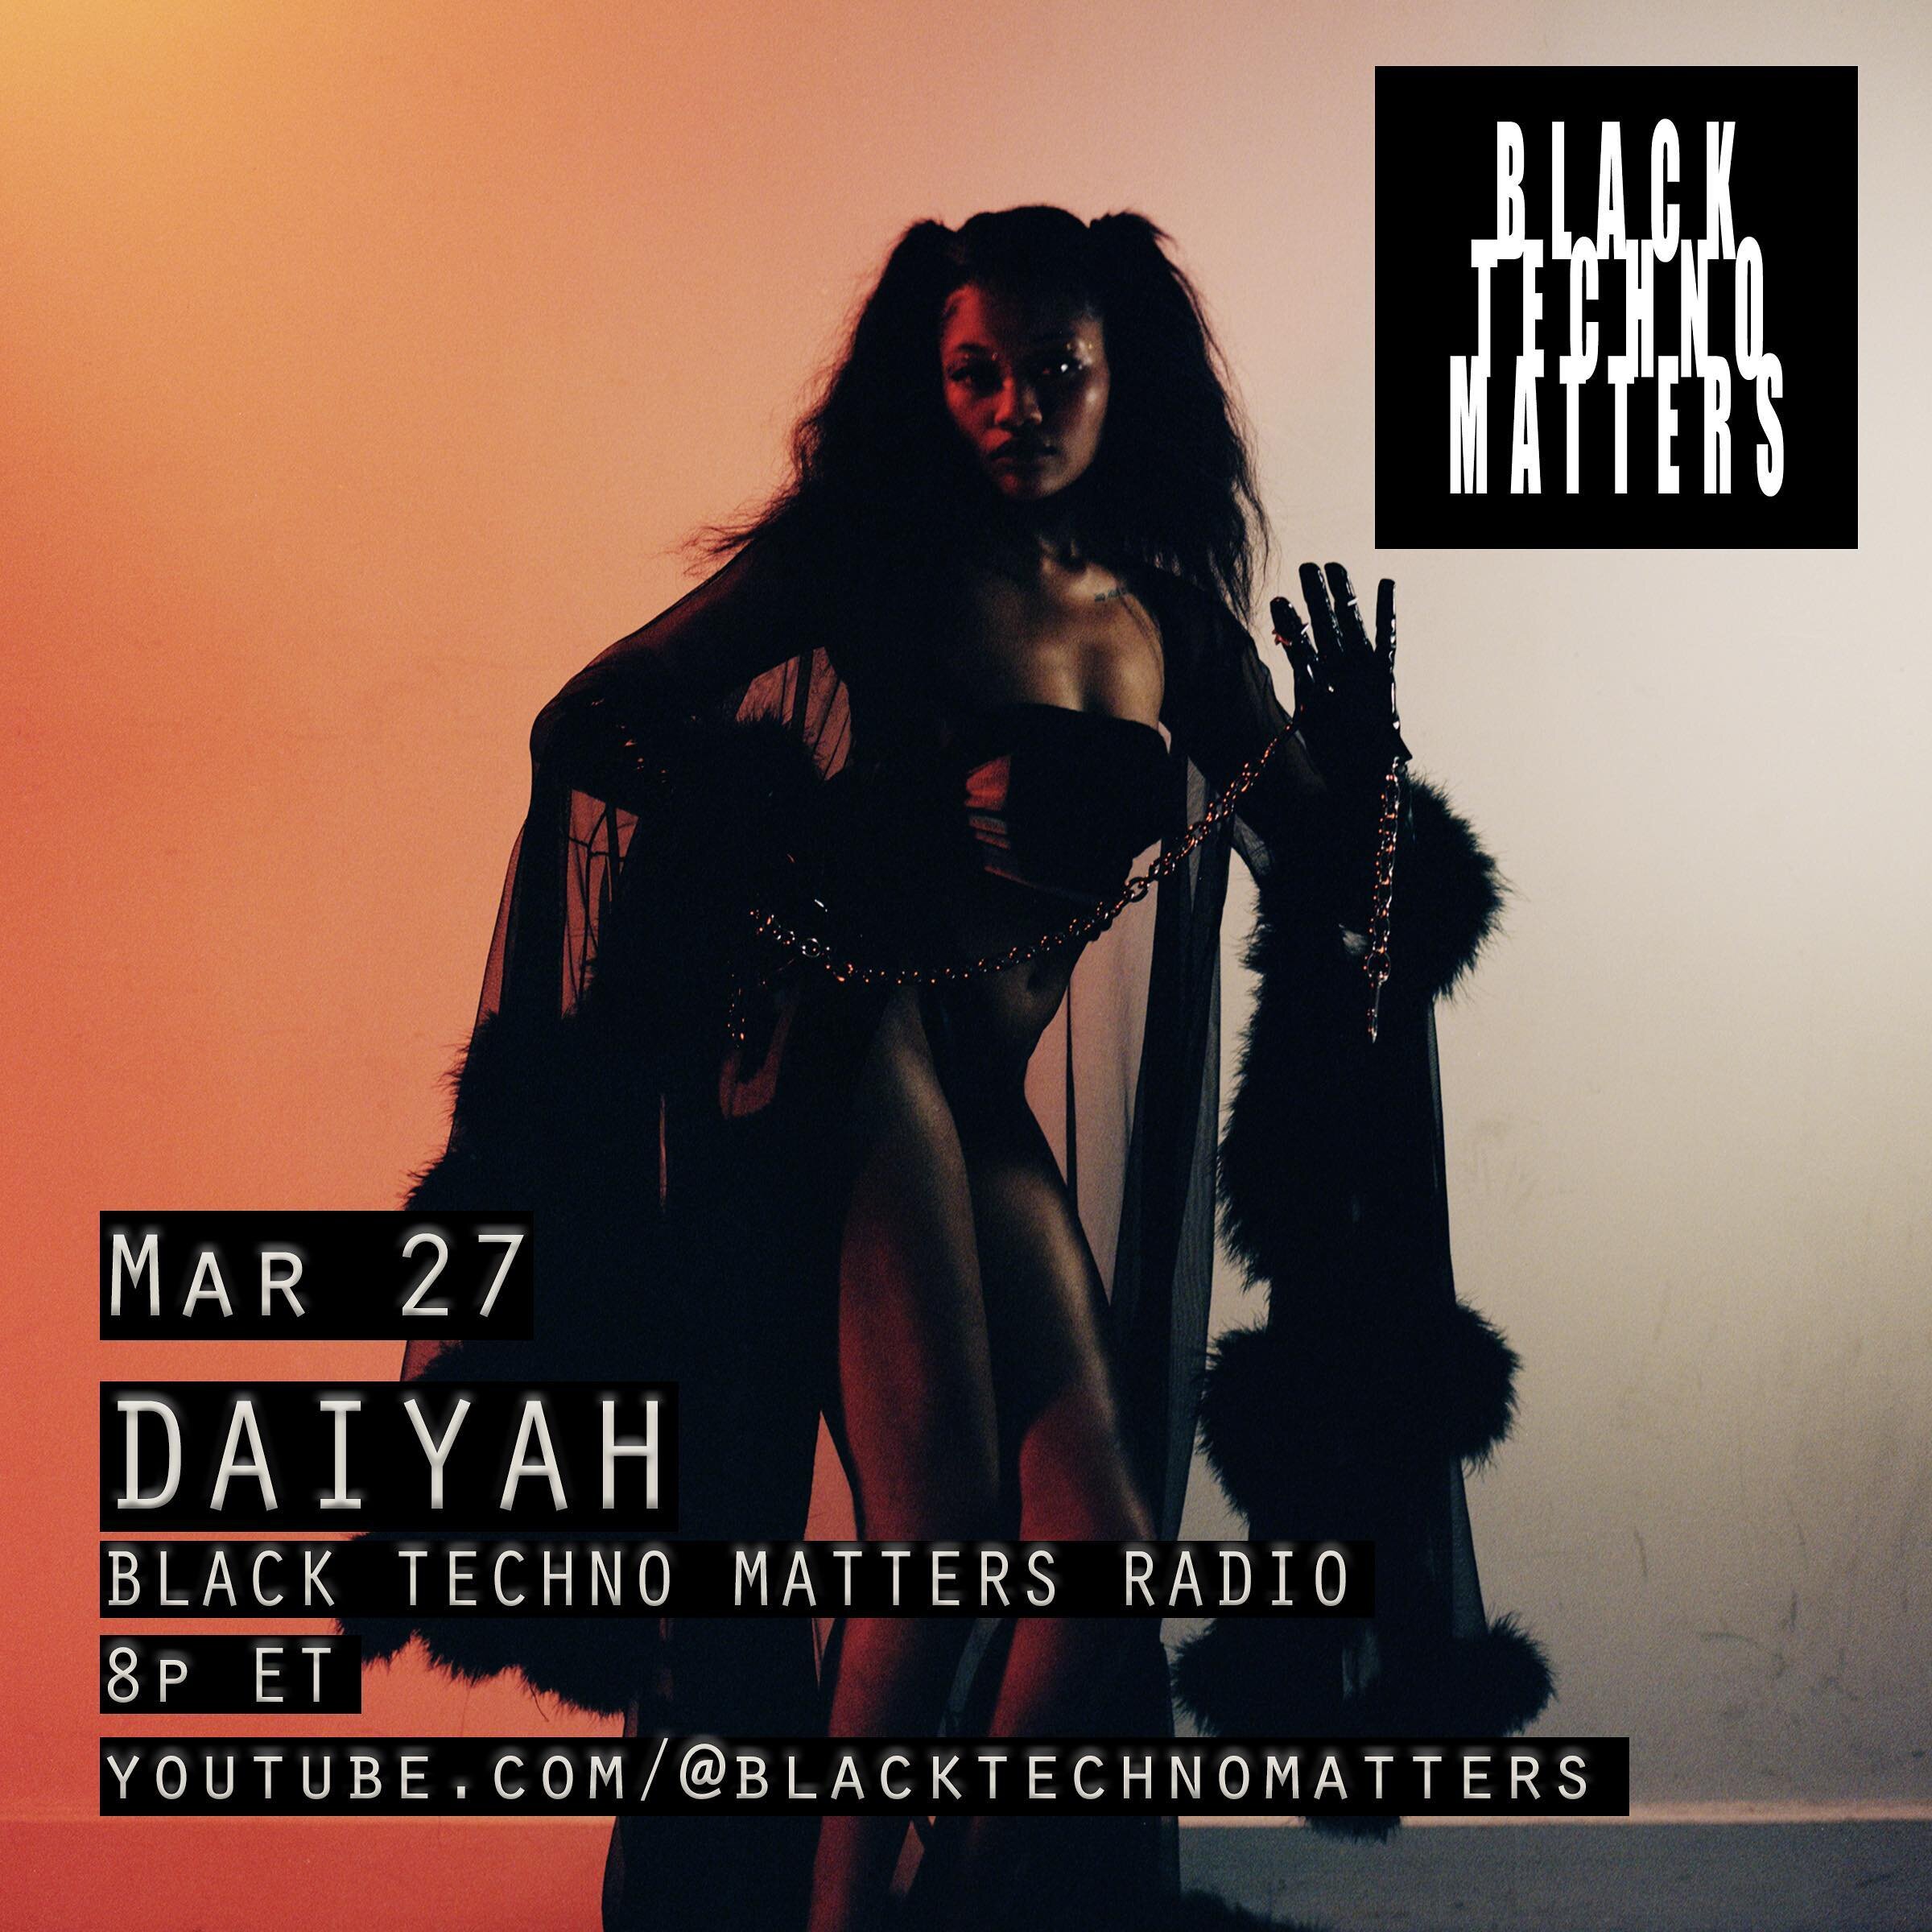 A new BLACK TECHNO MATTERS RADIO mix from @daiyahdaiyahdaiyah0 premieres tonight at 8p ET on our youtube channel! link in bio.

Title: USSY POWER

&quot;For women's history month, I compiled a set of tracks that not only represent the wackier sides o